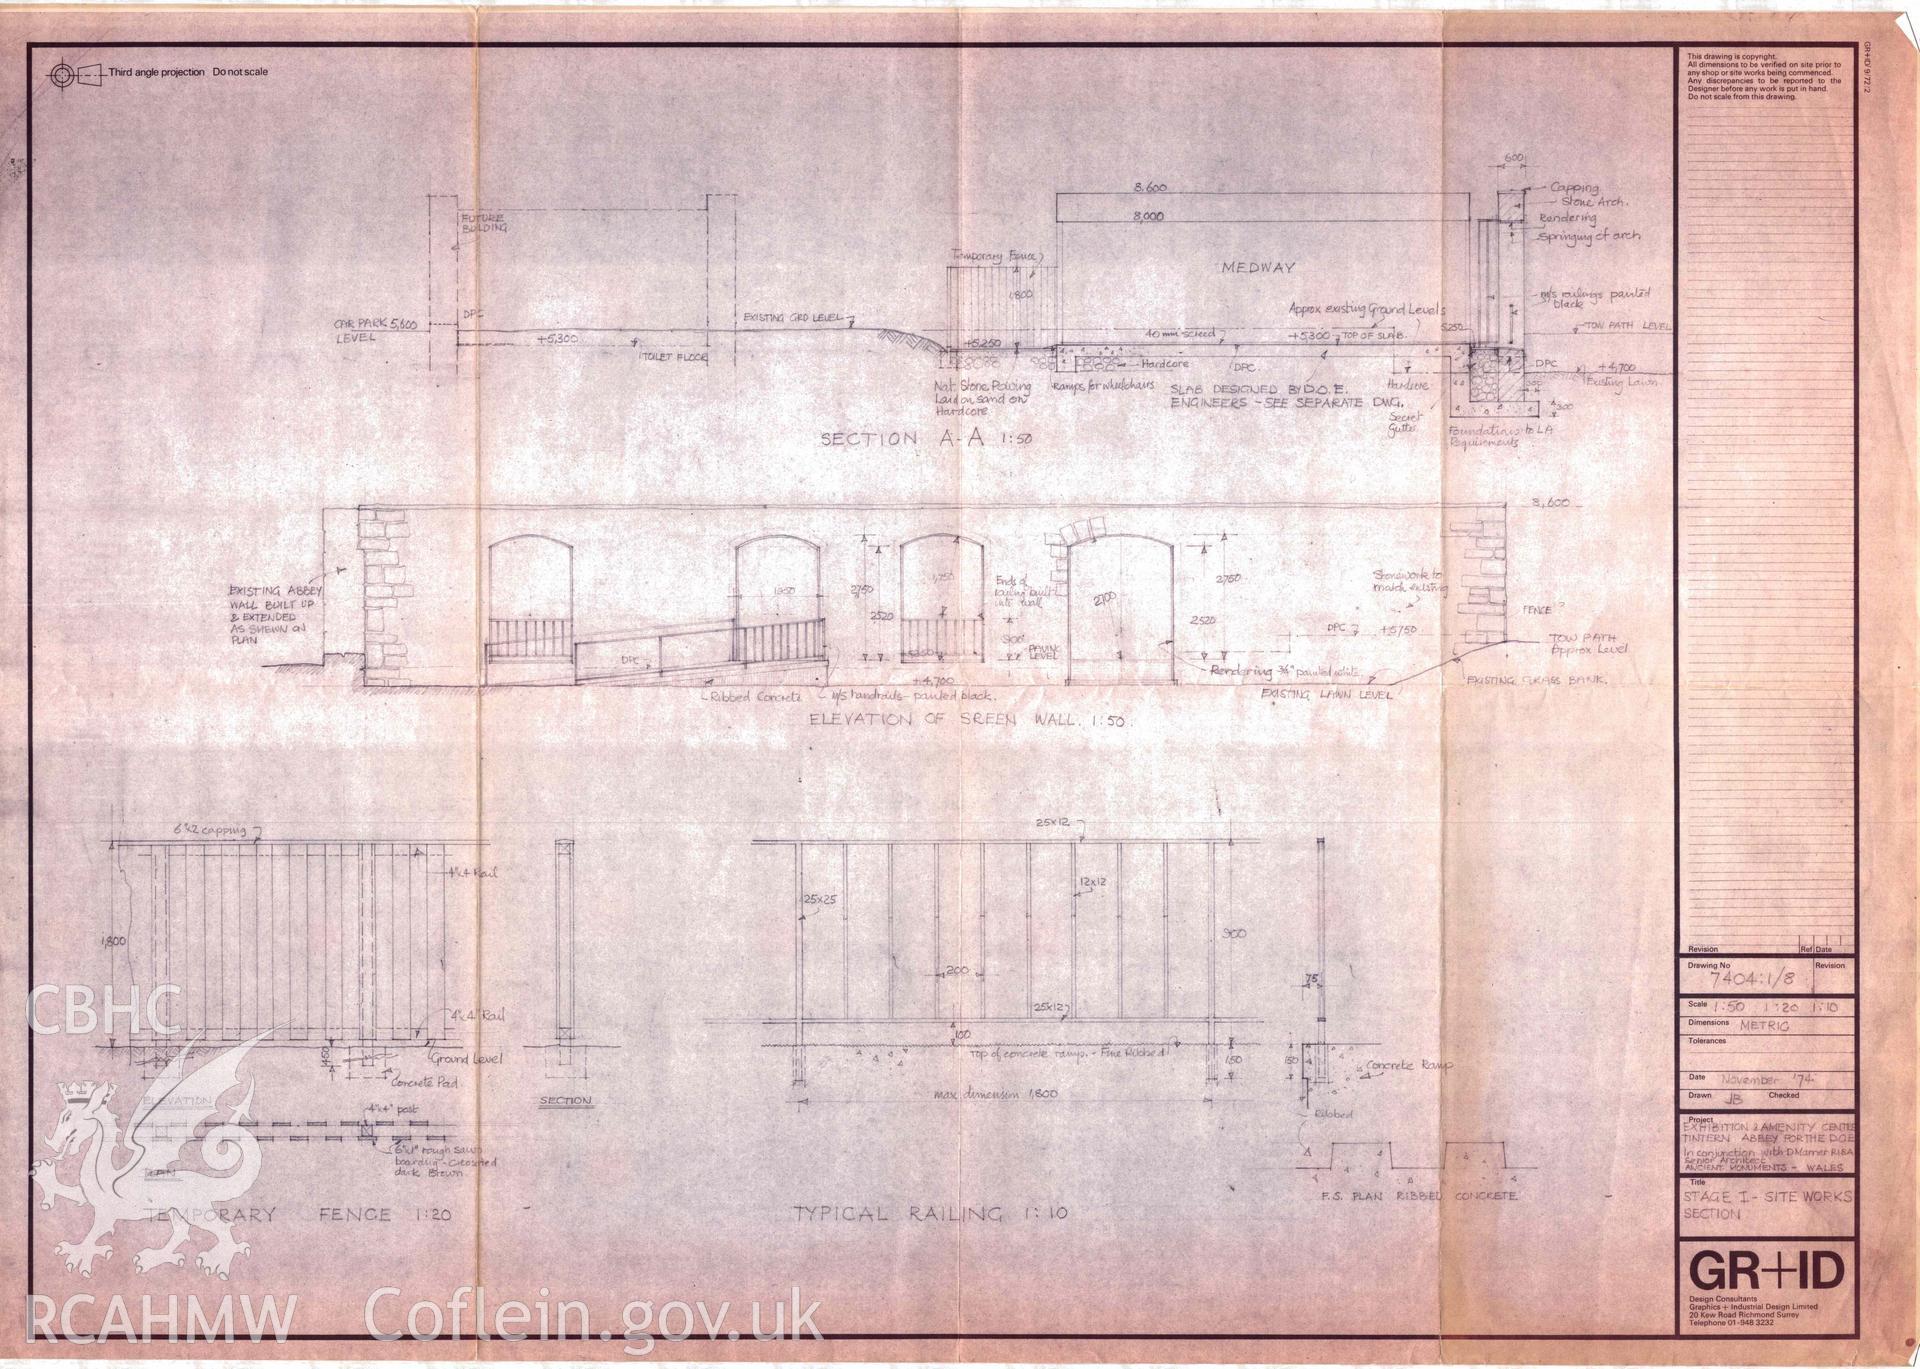 Cadw guardianship monument drawing, exhibition and amenity area, stage 1, site works plan, section, Tintern Abbey.  Dated  November 1974.